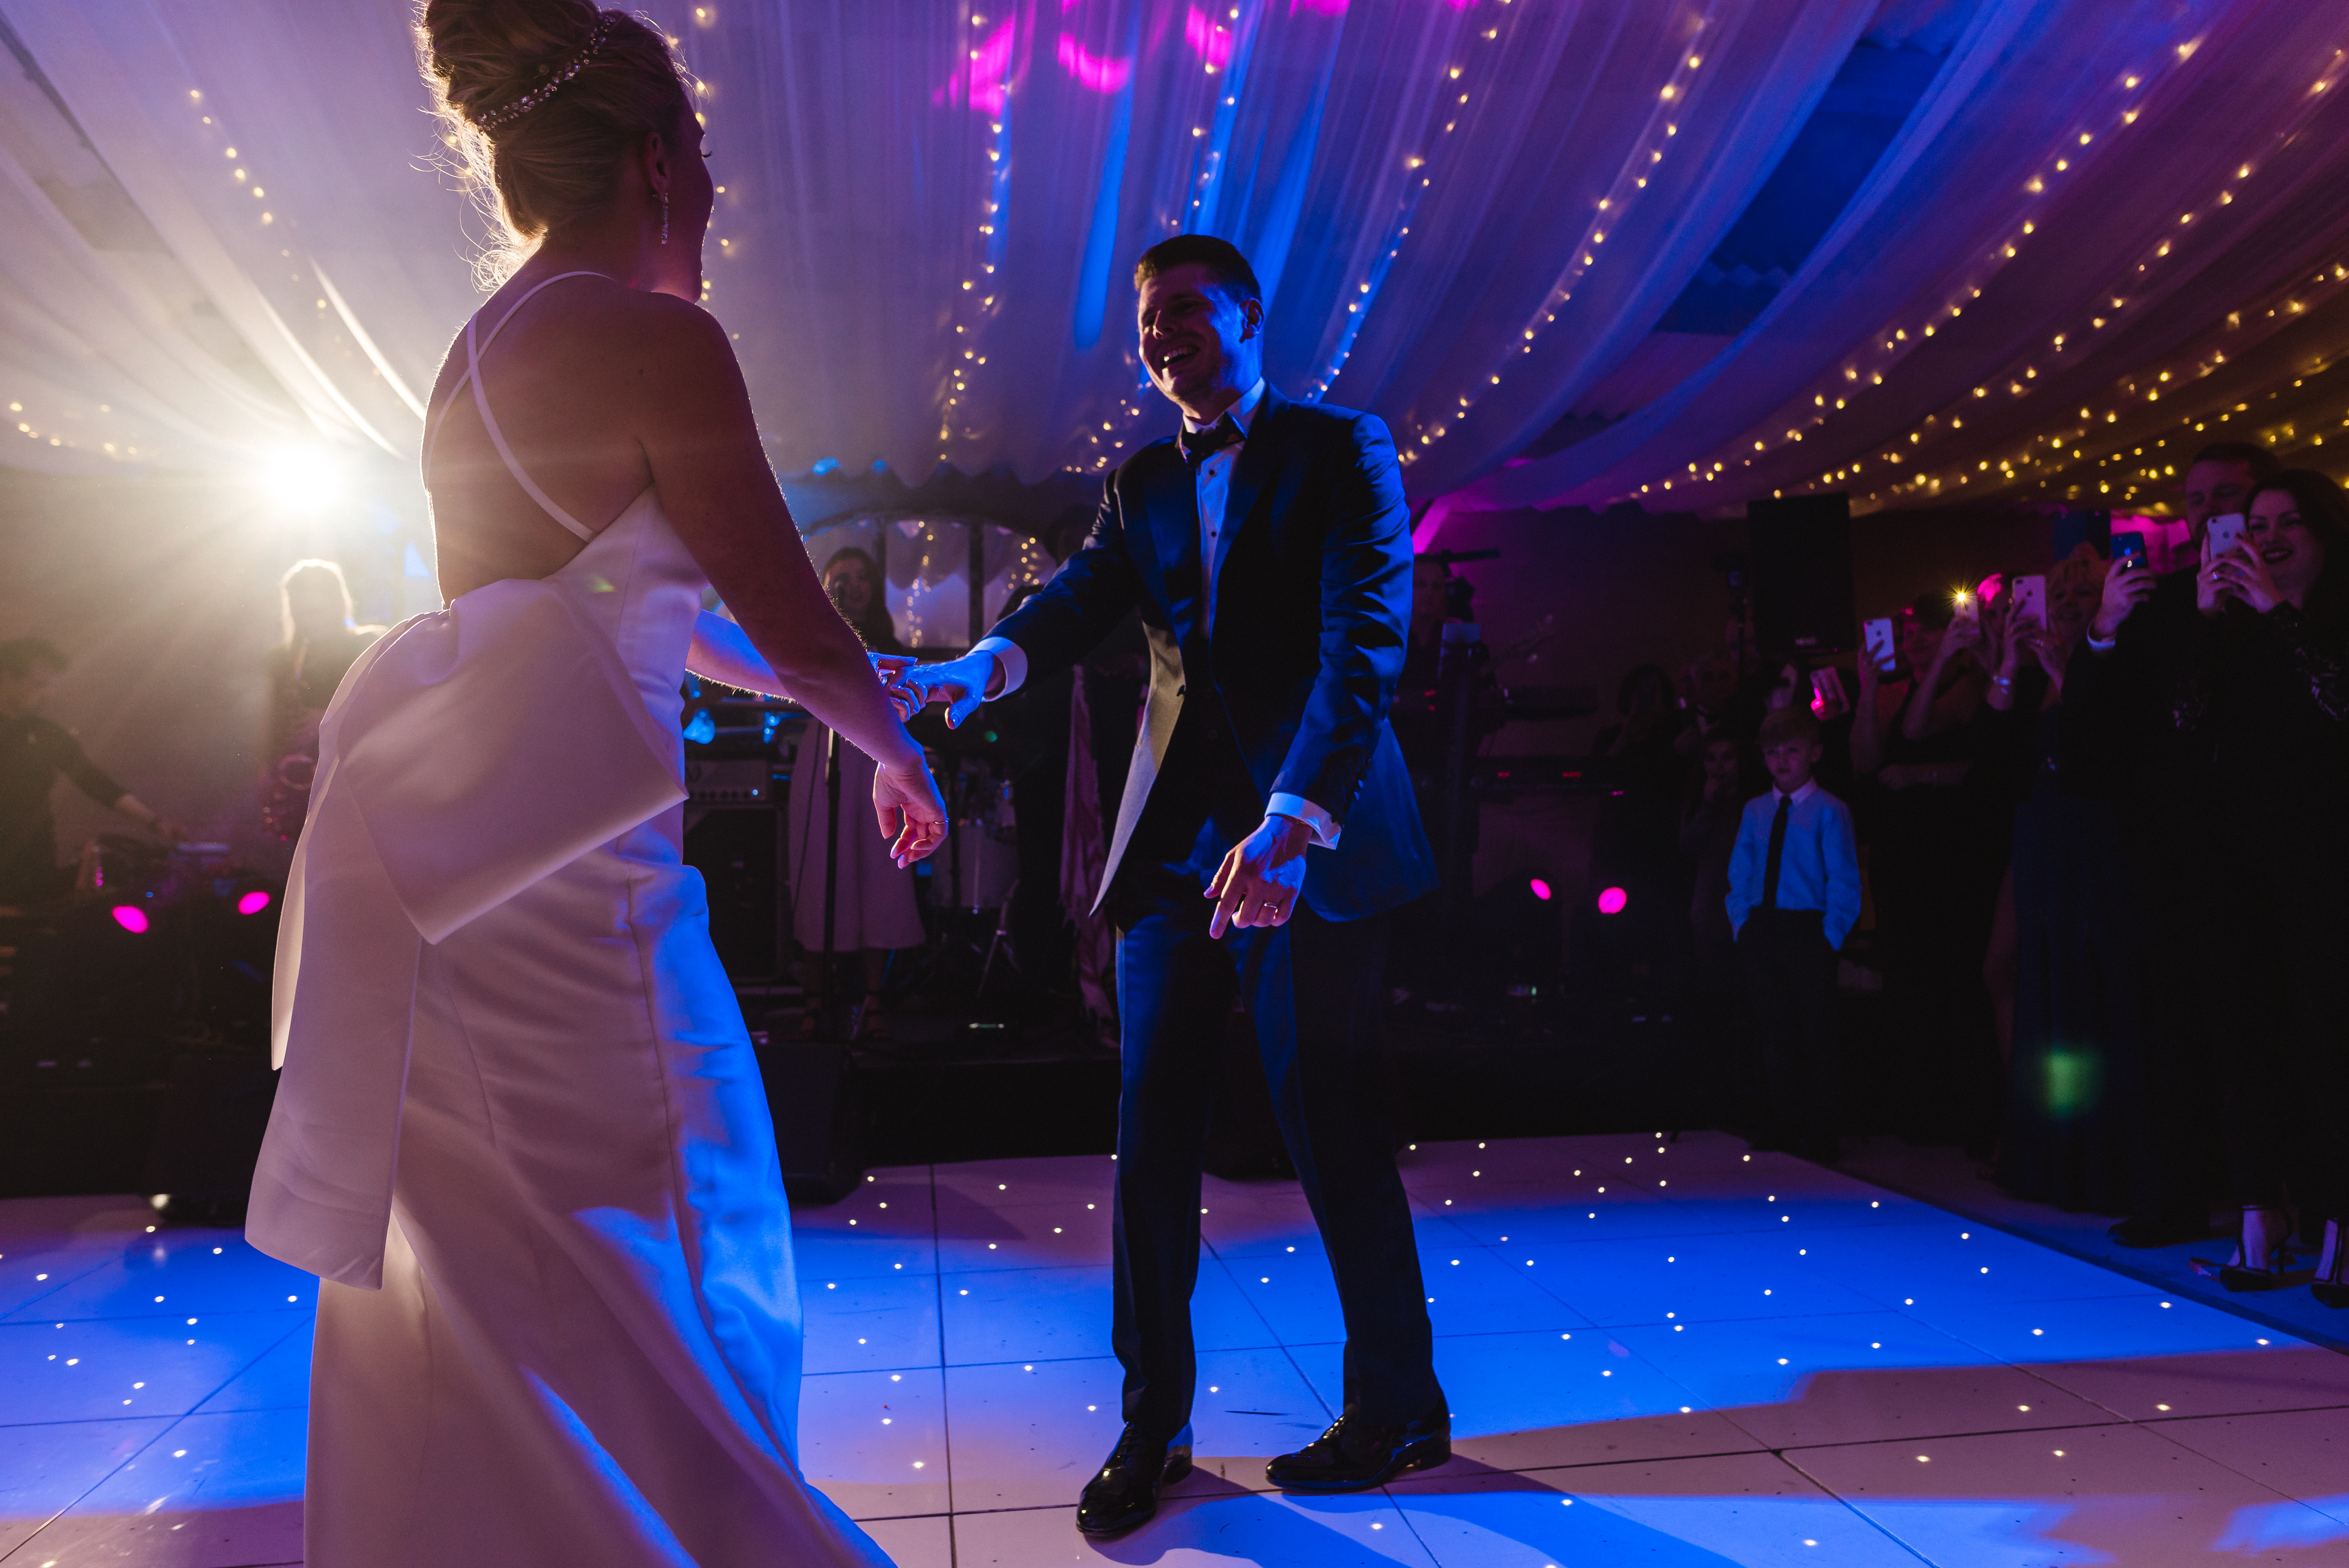 The Top 10 Wedding Songs For 2020 - No. 9 Might Surprise You